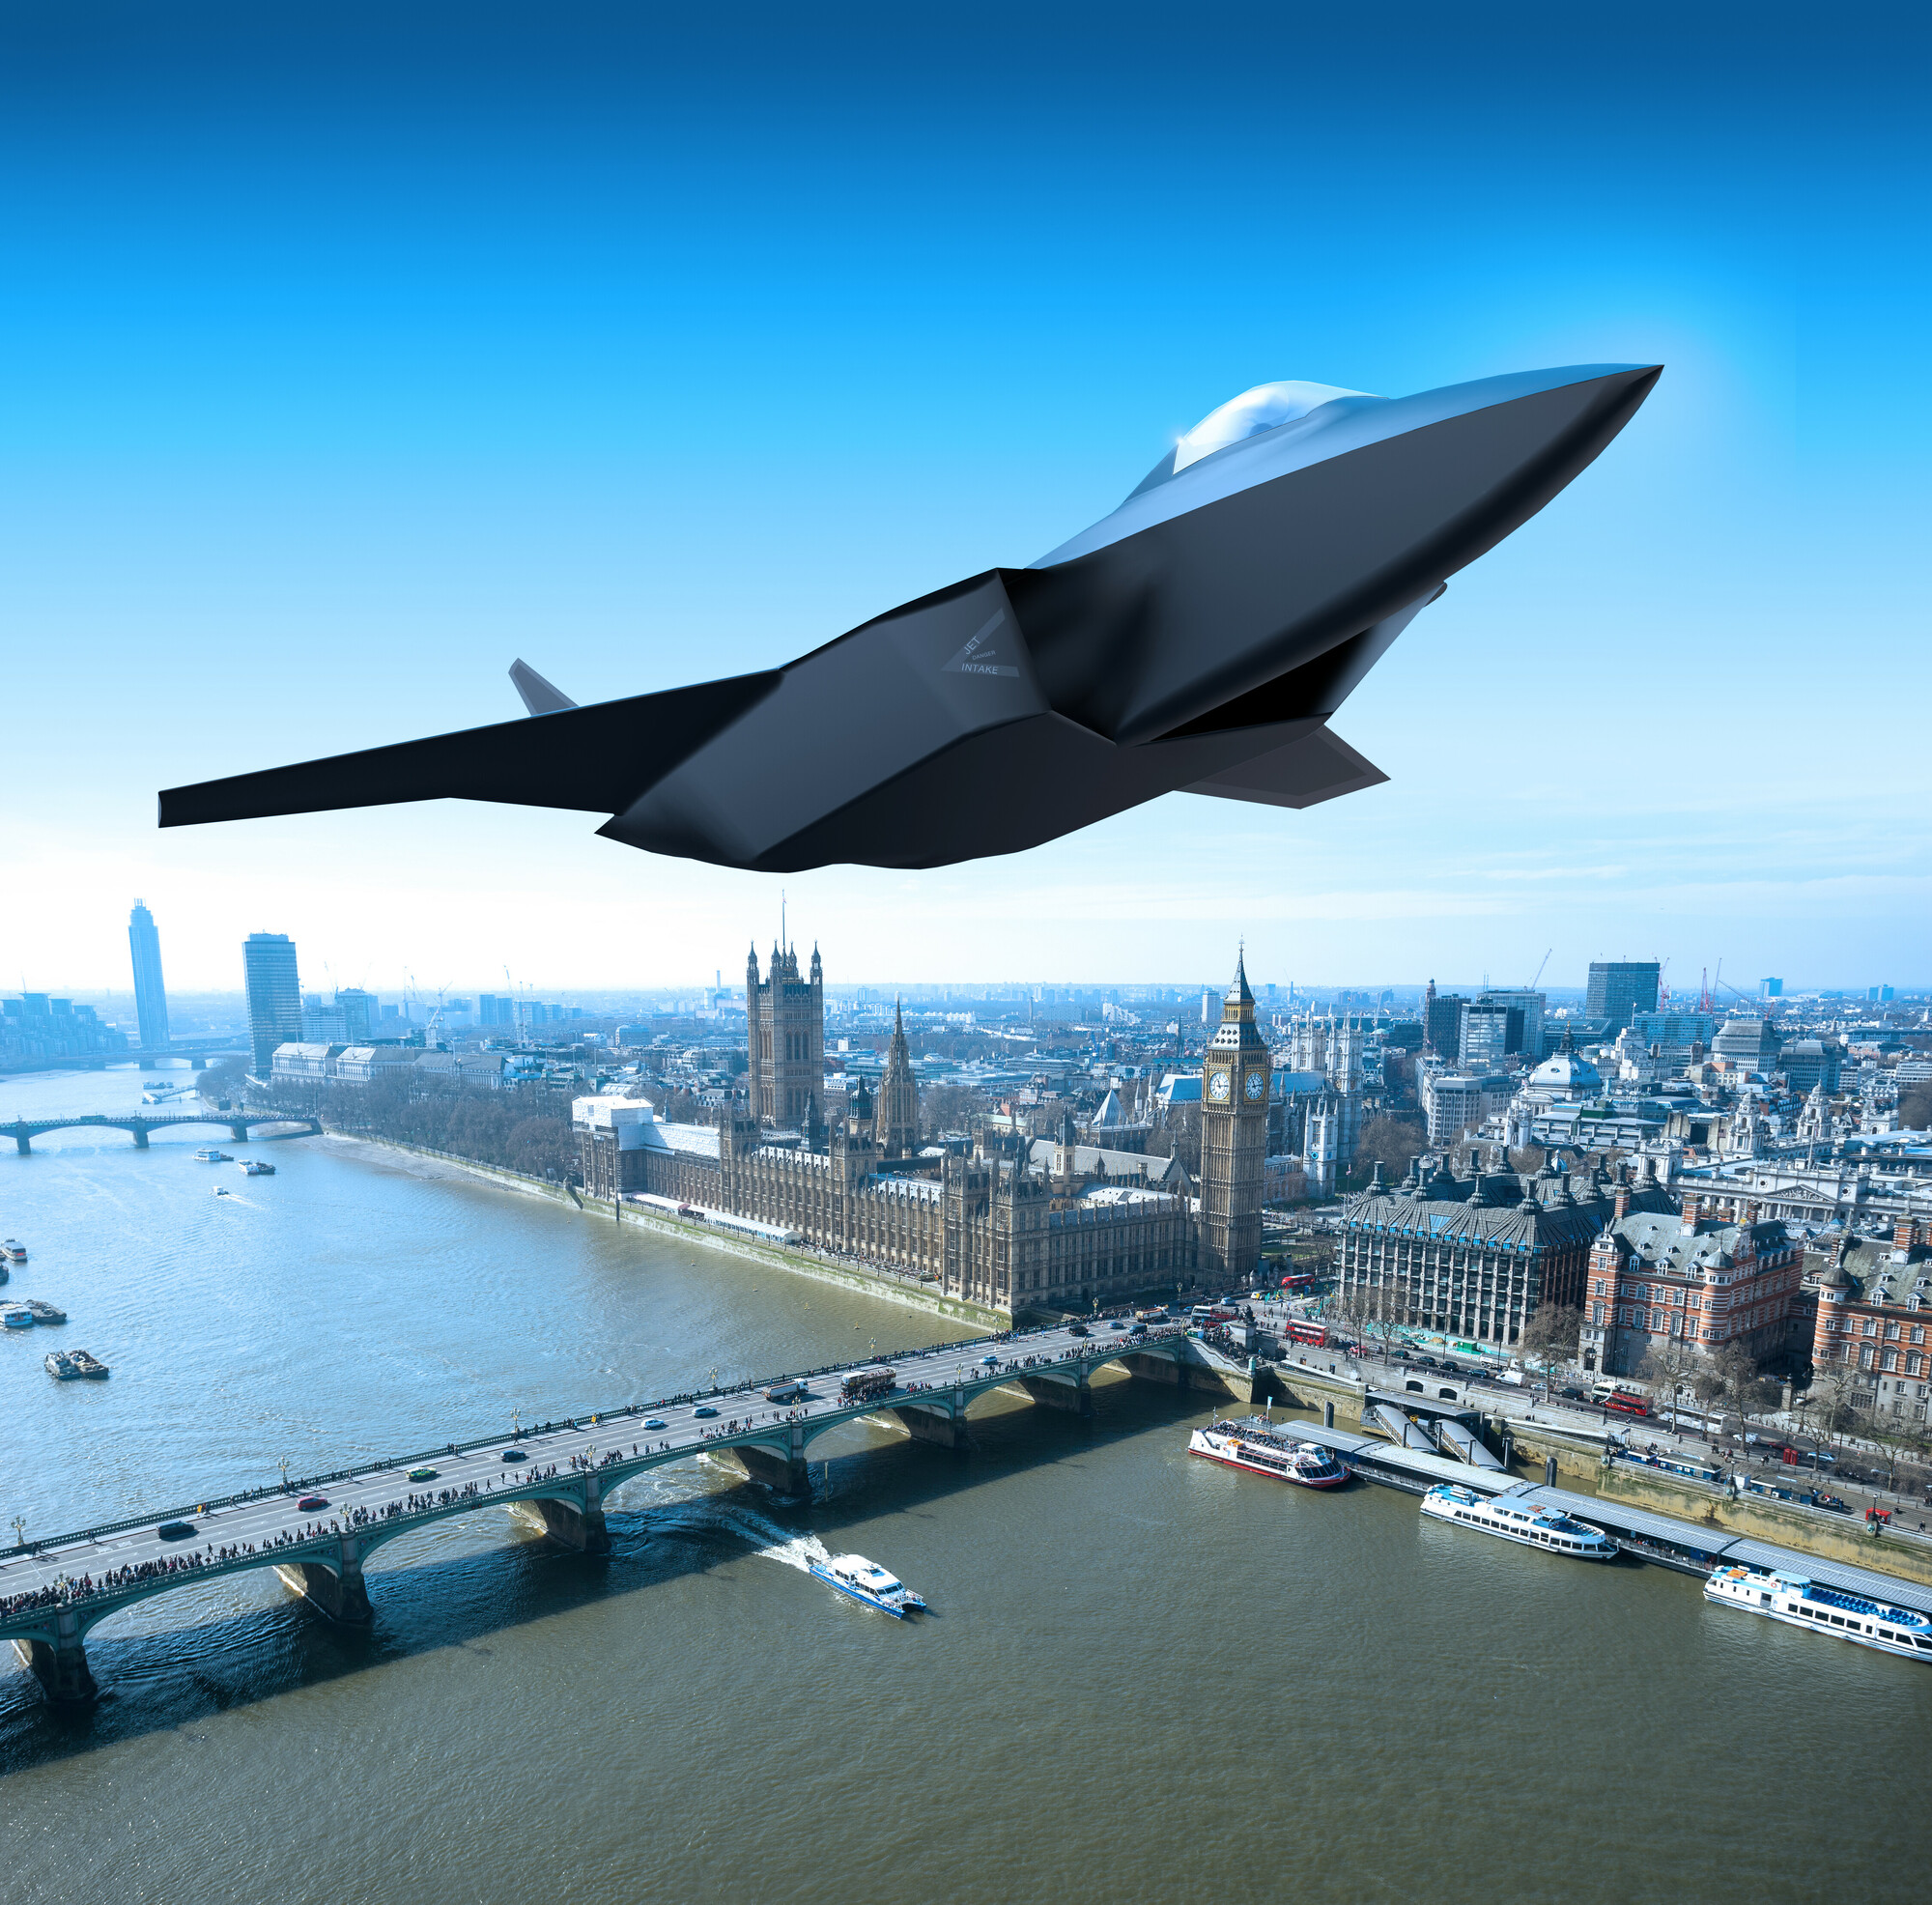 Image shows graphic of future fighter jet flying over London.